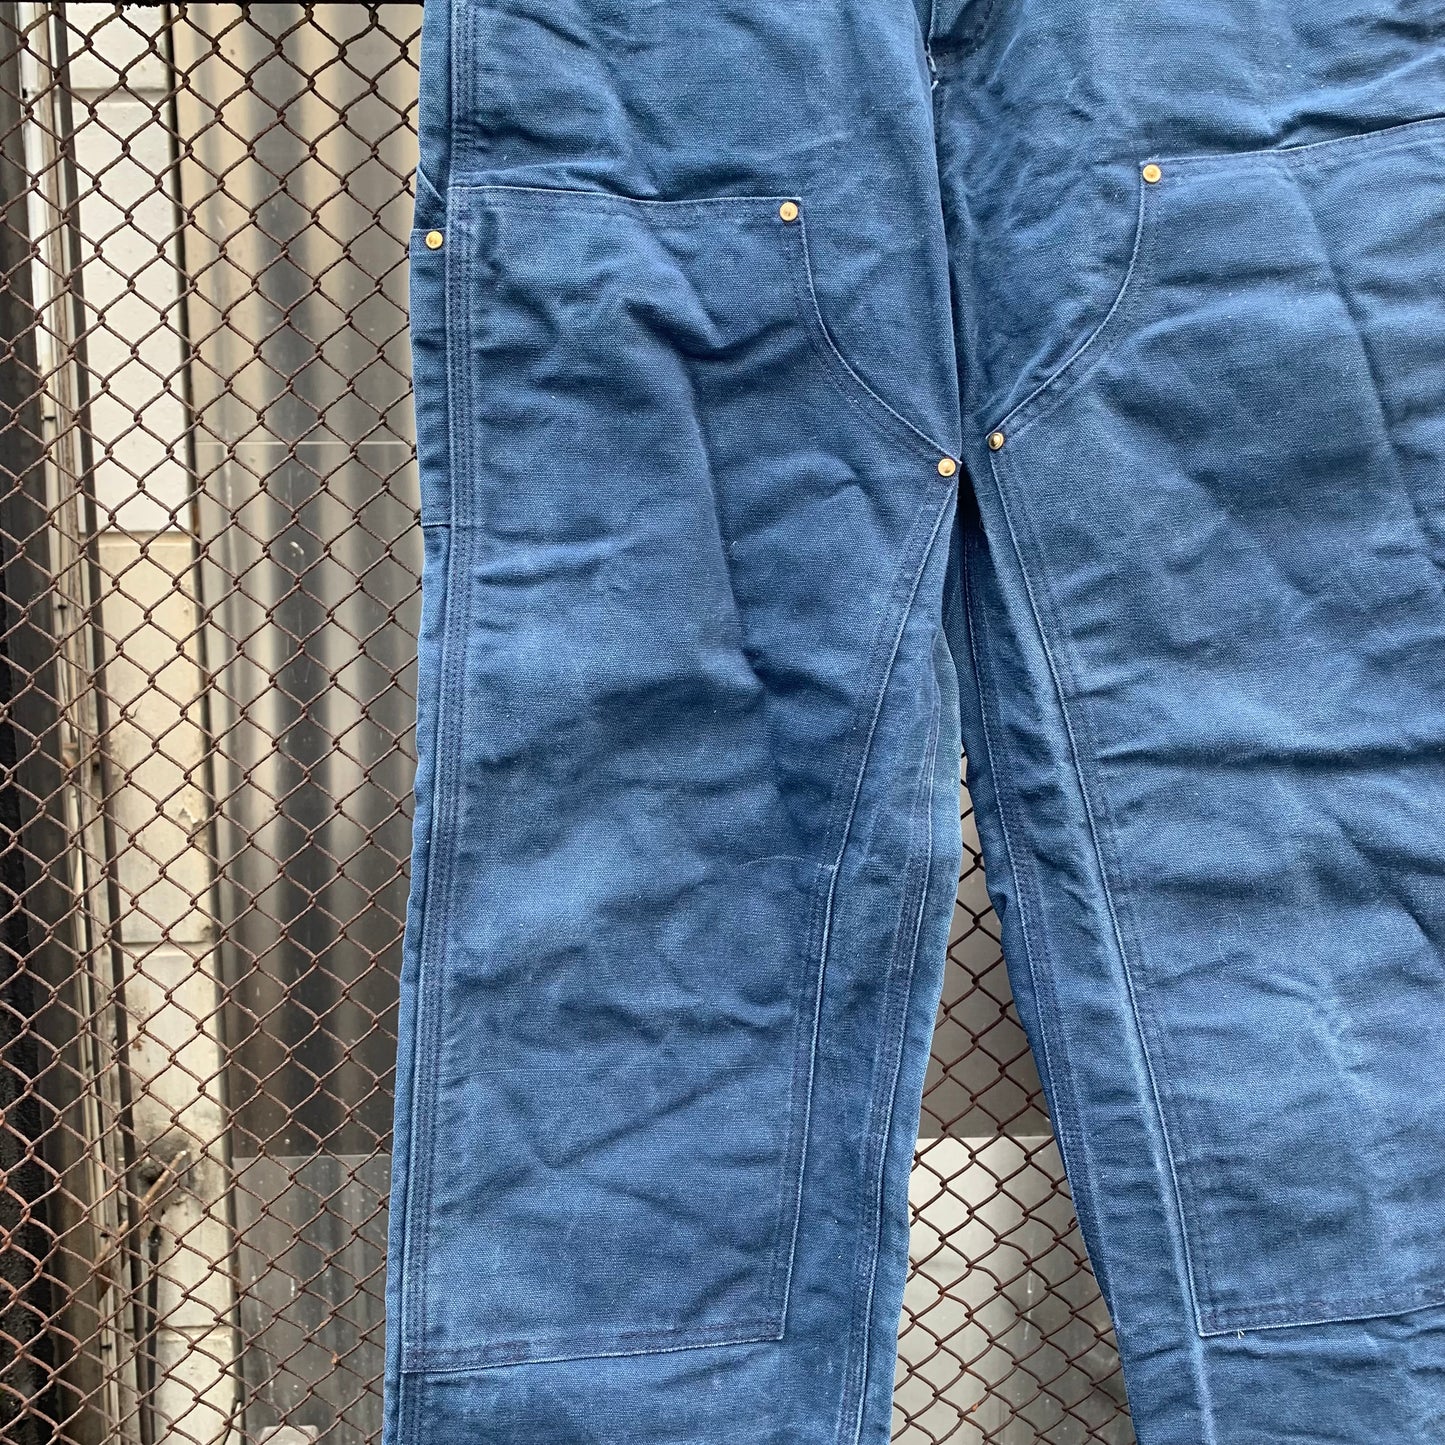 Carhartt Made in USA Blue Double Knees Carpenter Pants